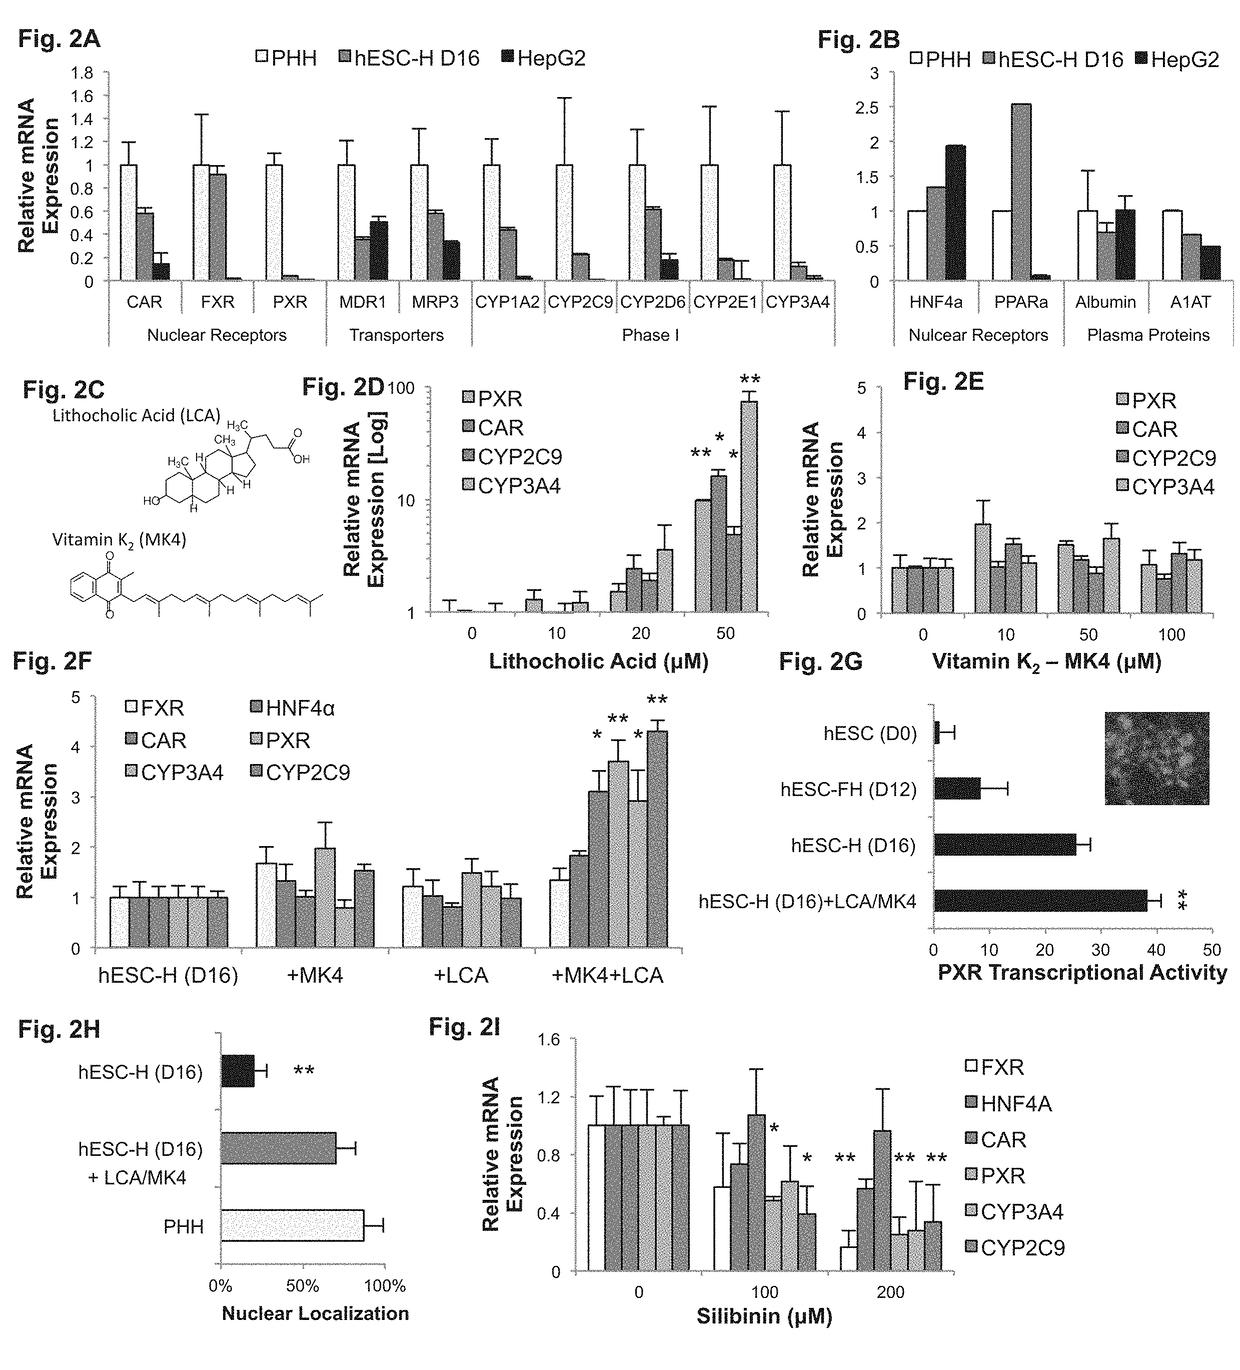 Methods of inducing metabolic maturation of human pluripotent stem cells-derived hepatocytes